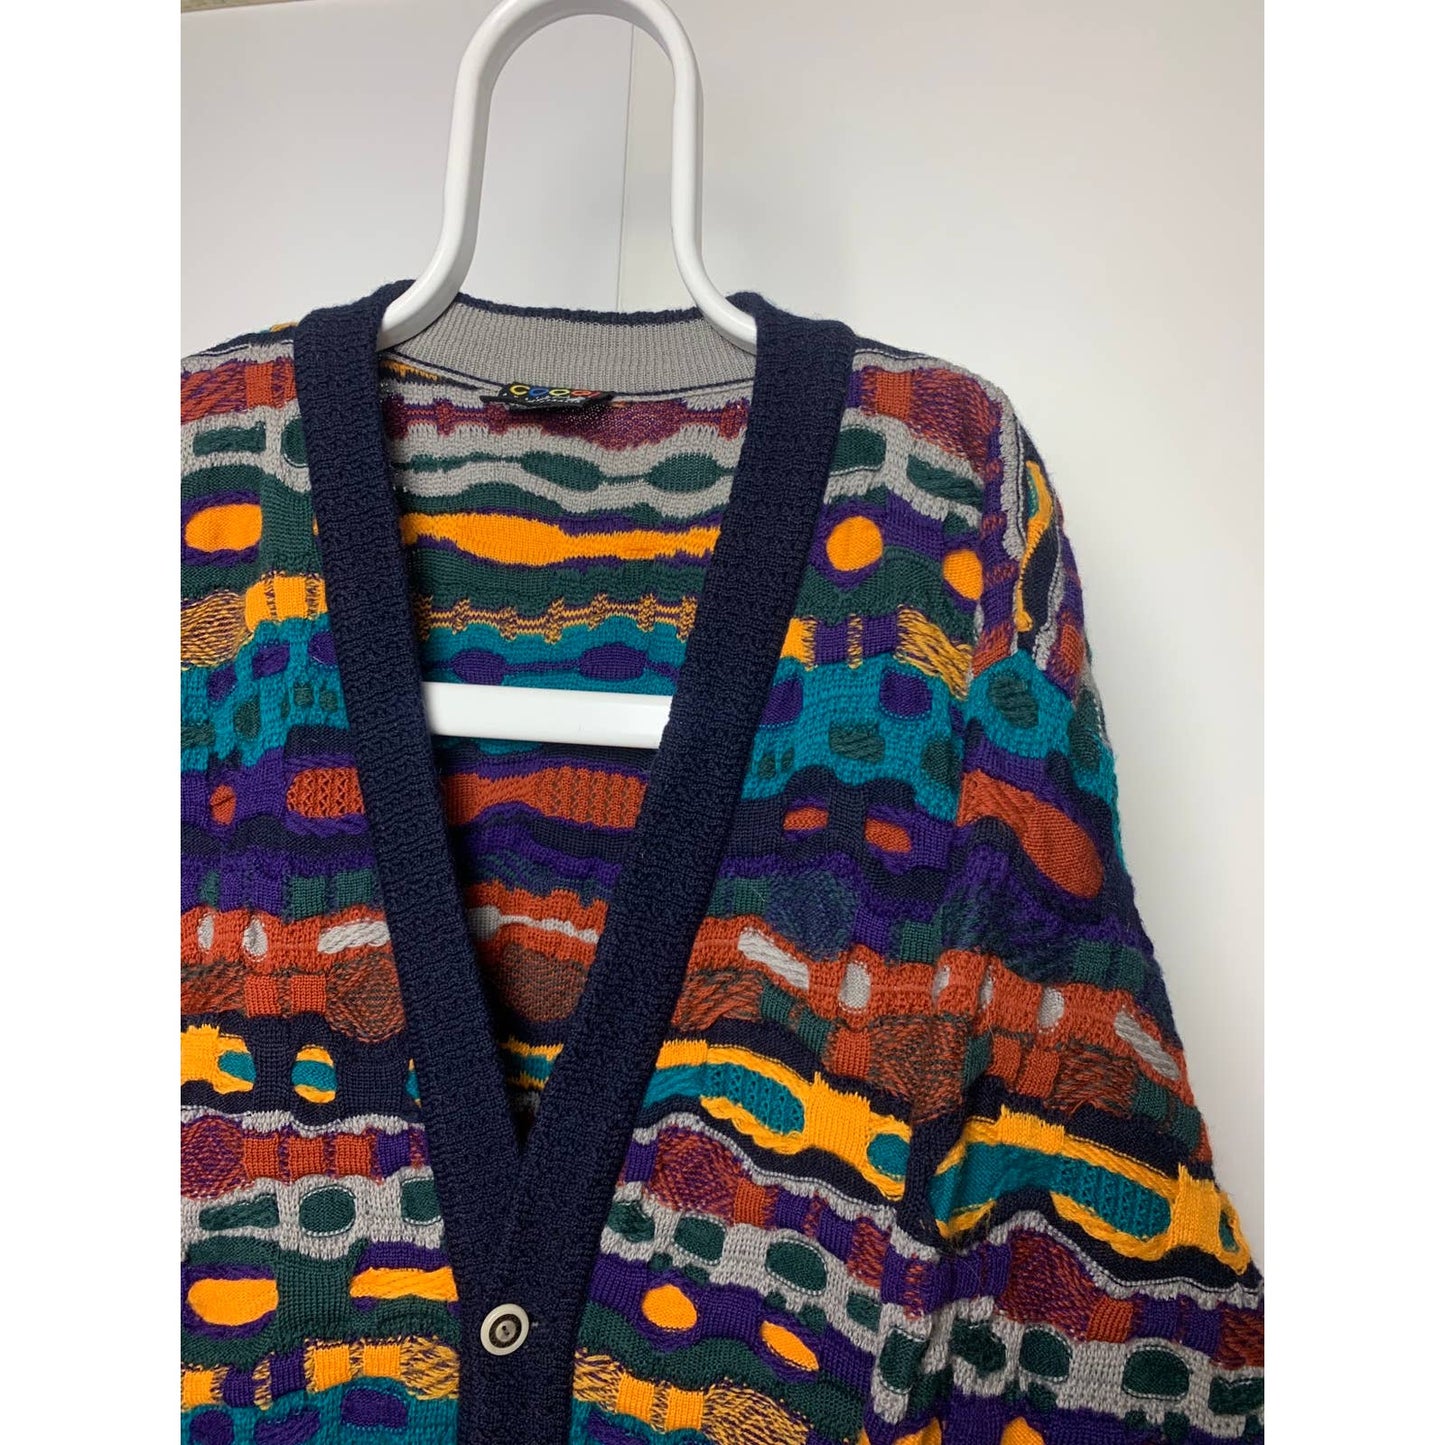 Coogi sweater vintage cardigan multicolor cable knit